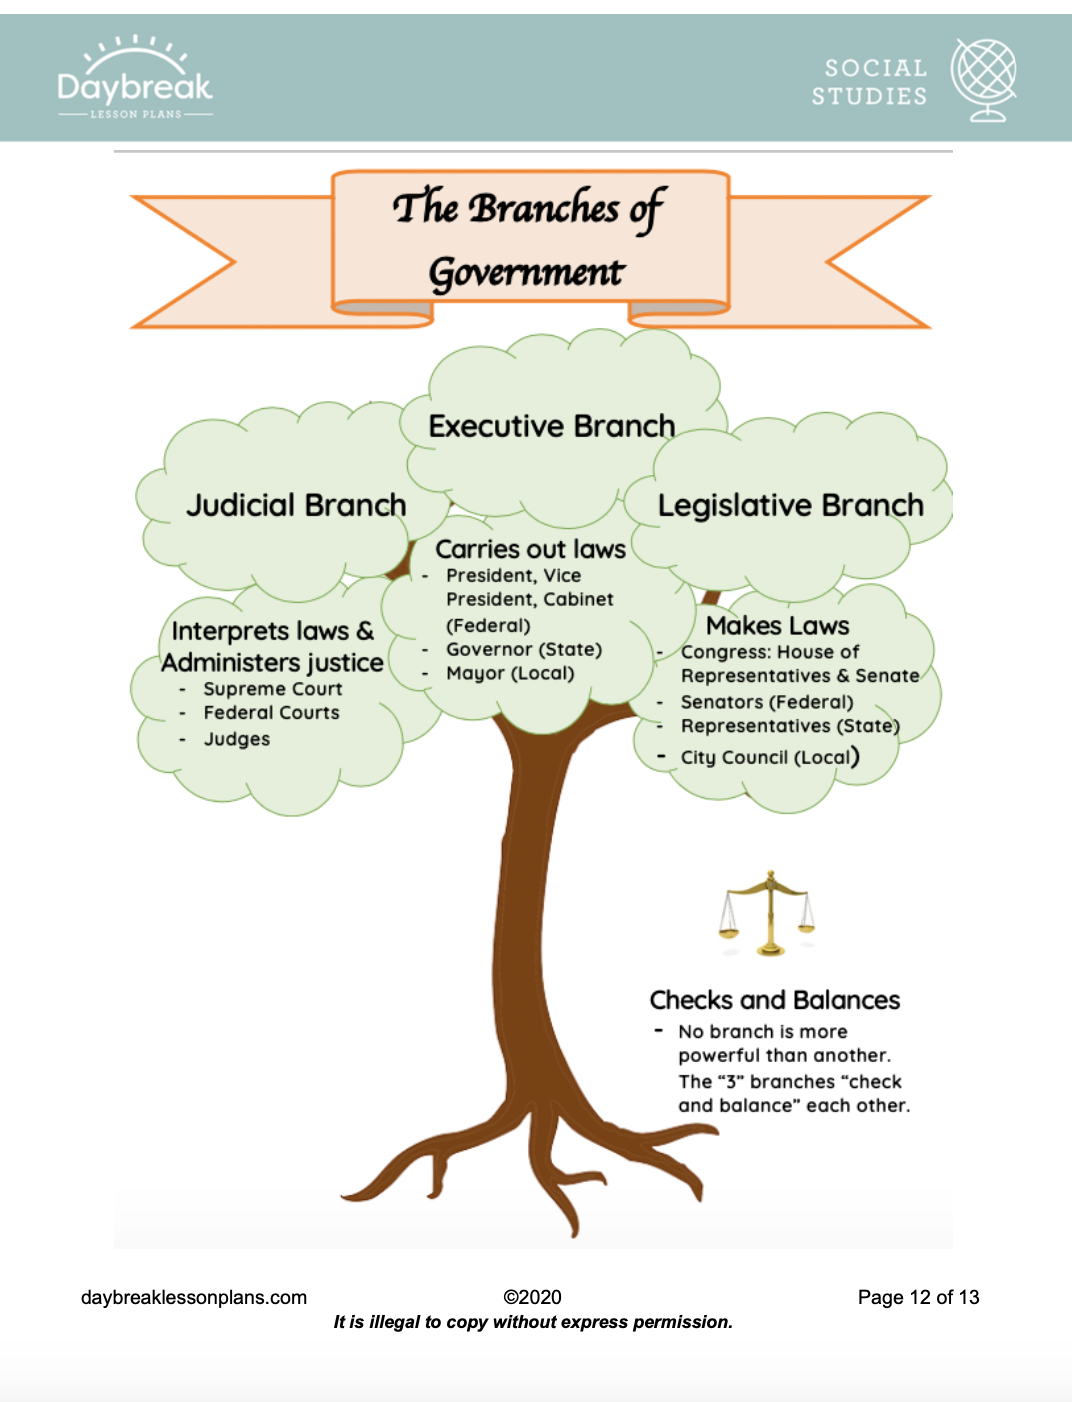 three branches of government tree